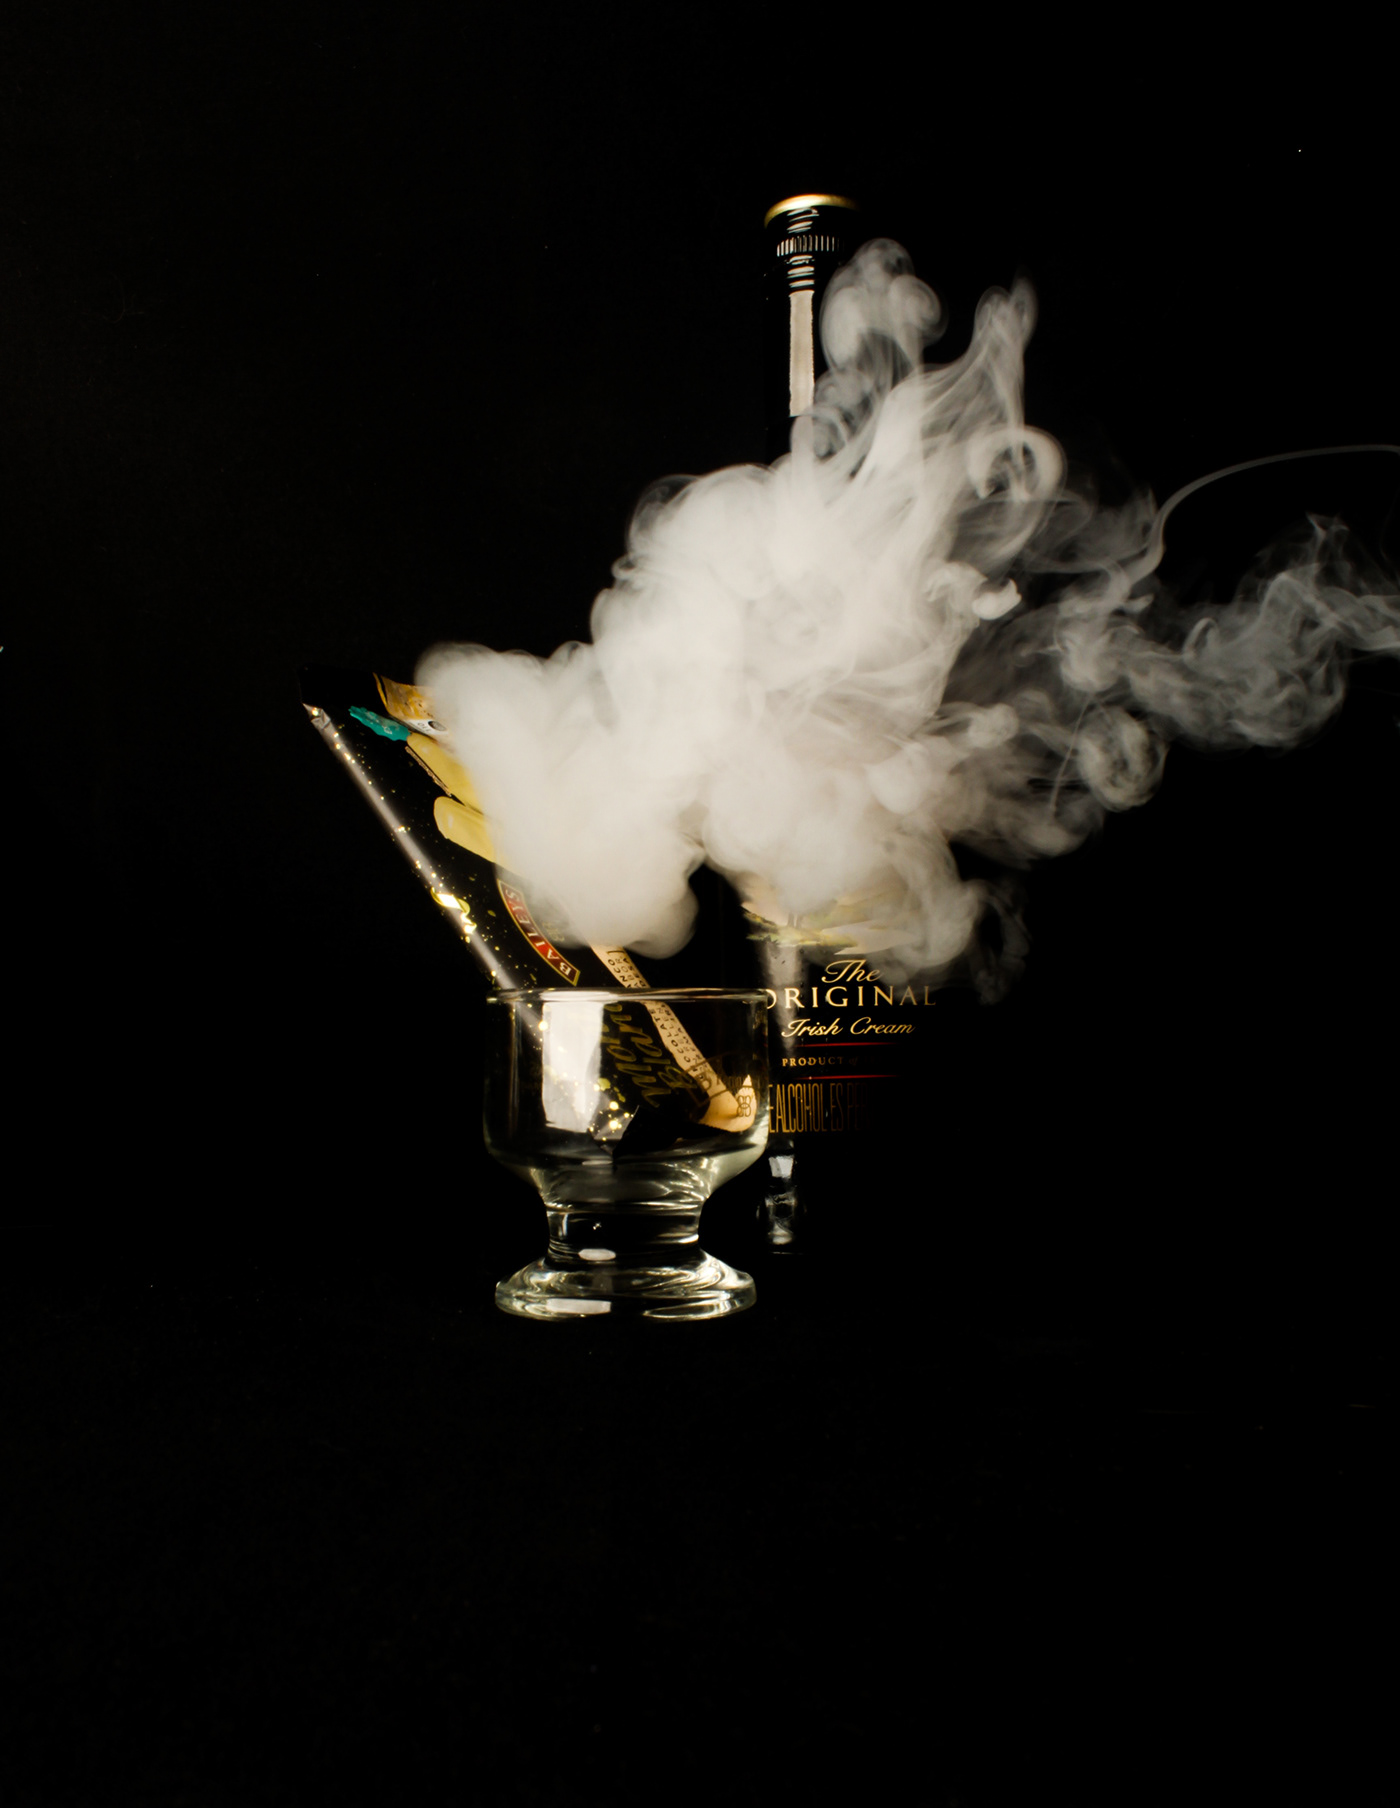 smoke black montblanc cup ideas autor photography project FUSIONBRANDS porposal withe